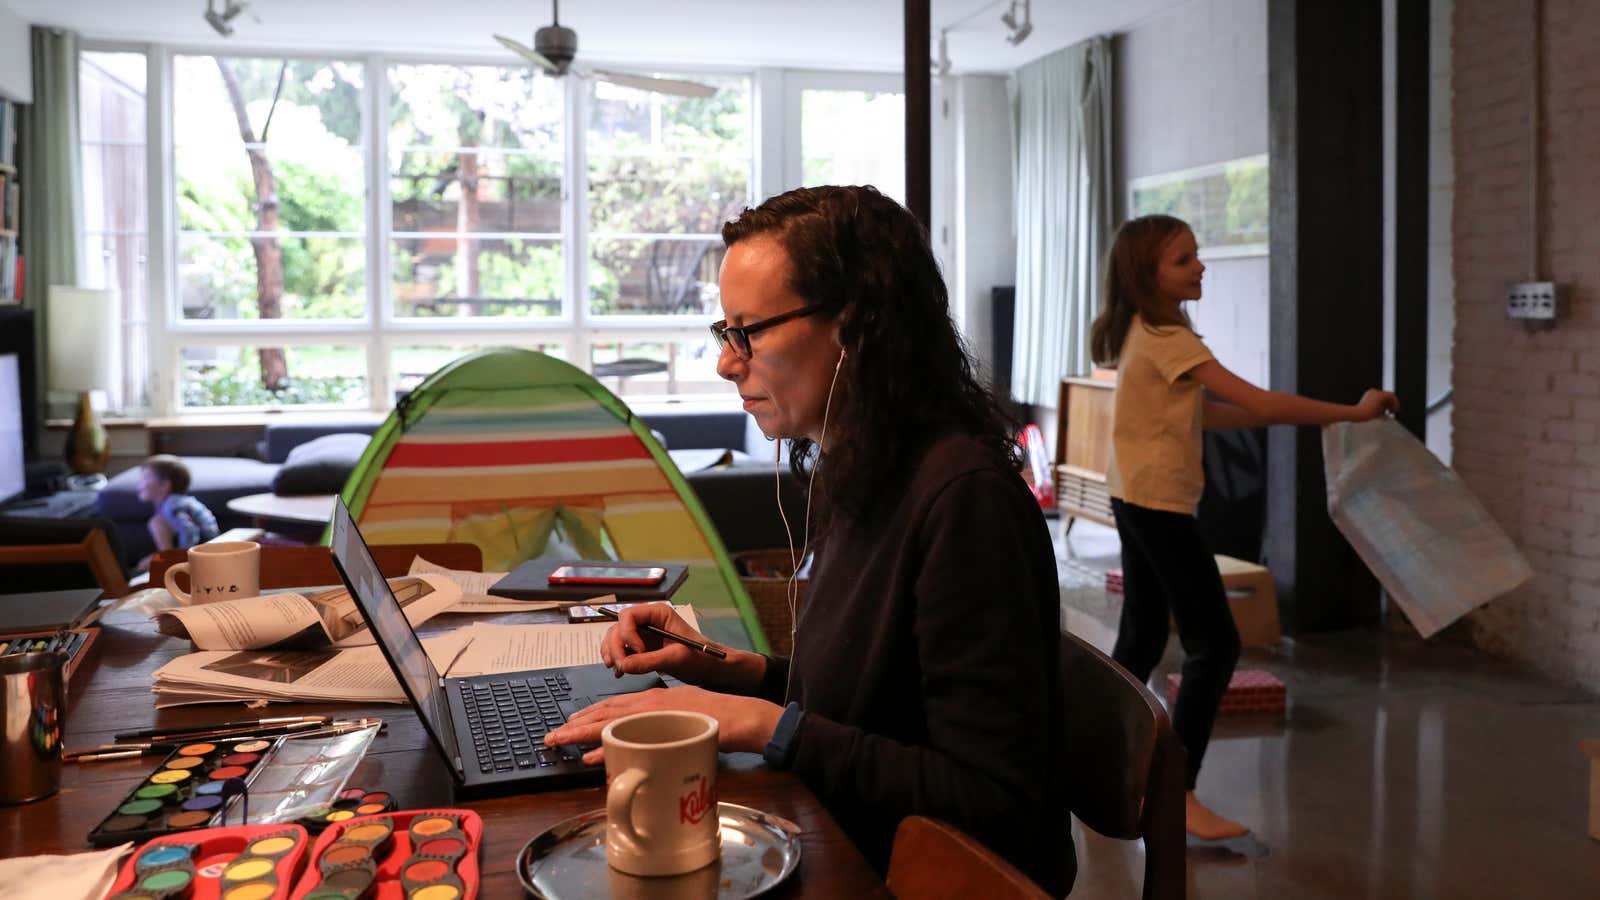 Remote workers can pitch and request ideas to help ease into a new job.